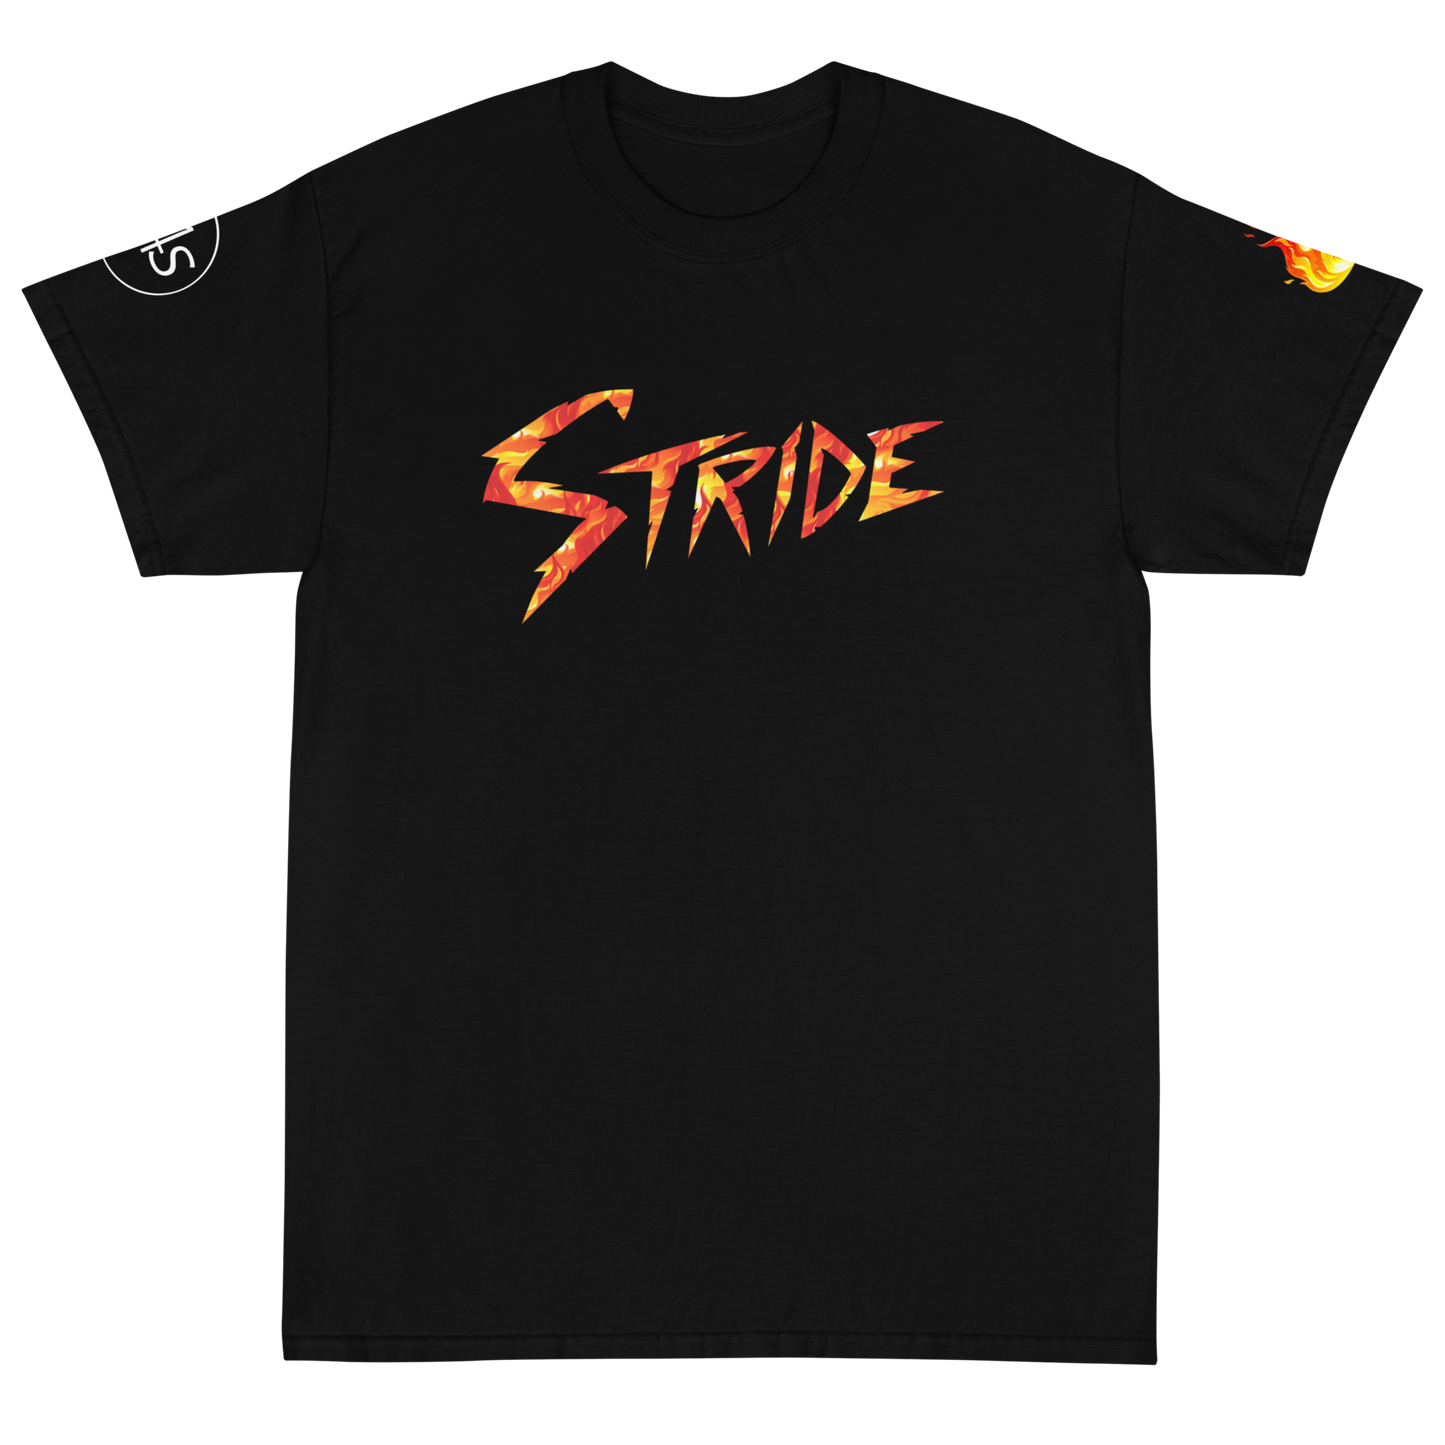 #Stride Fire And Desire Tee